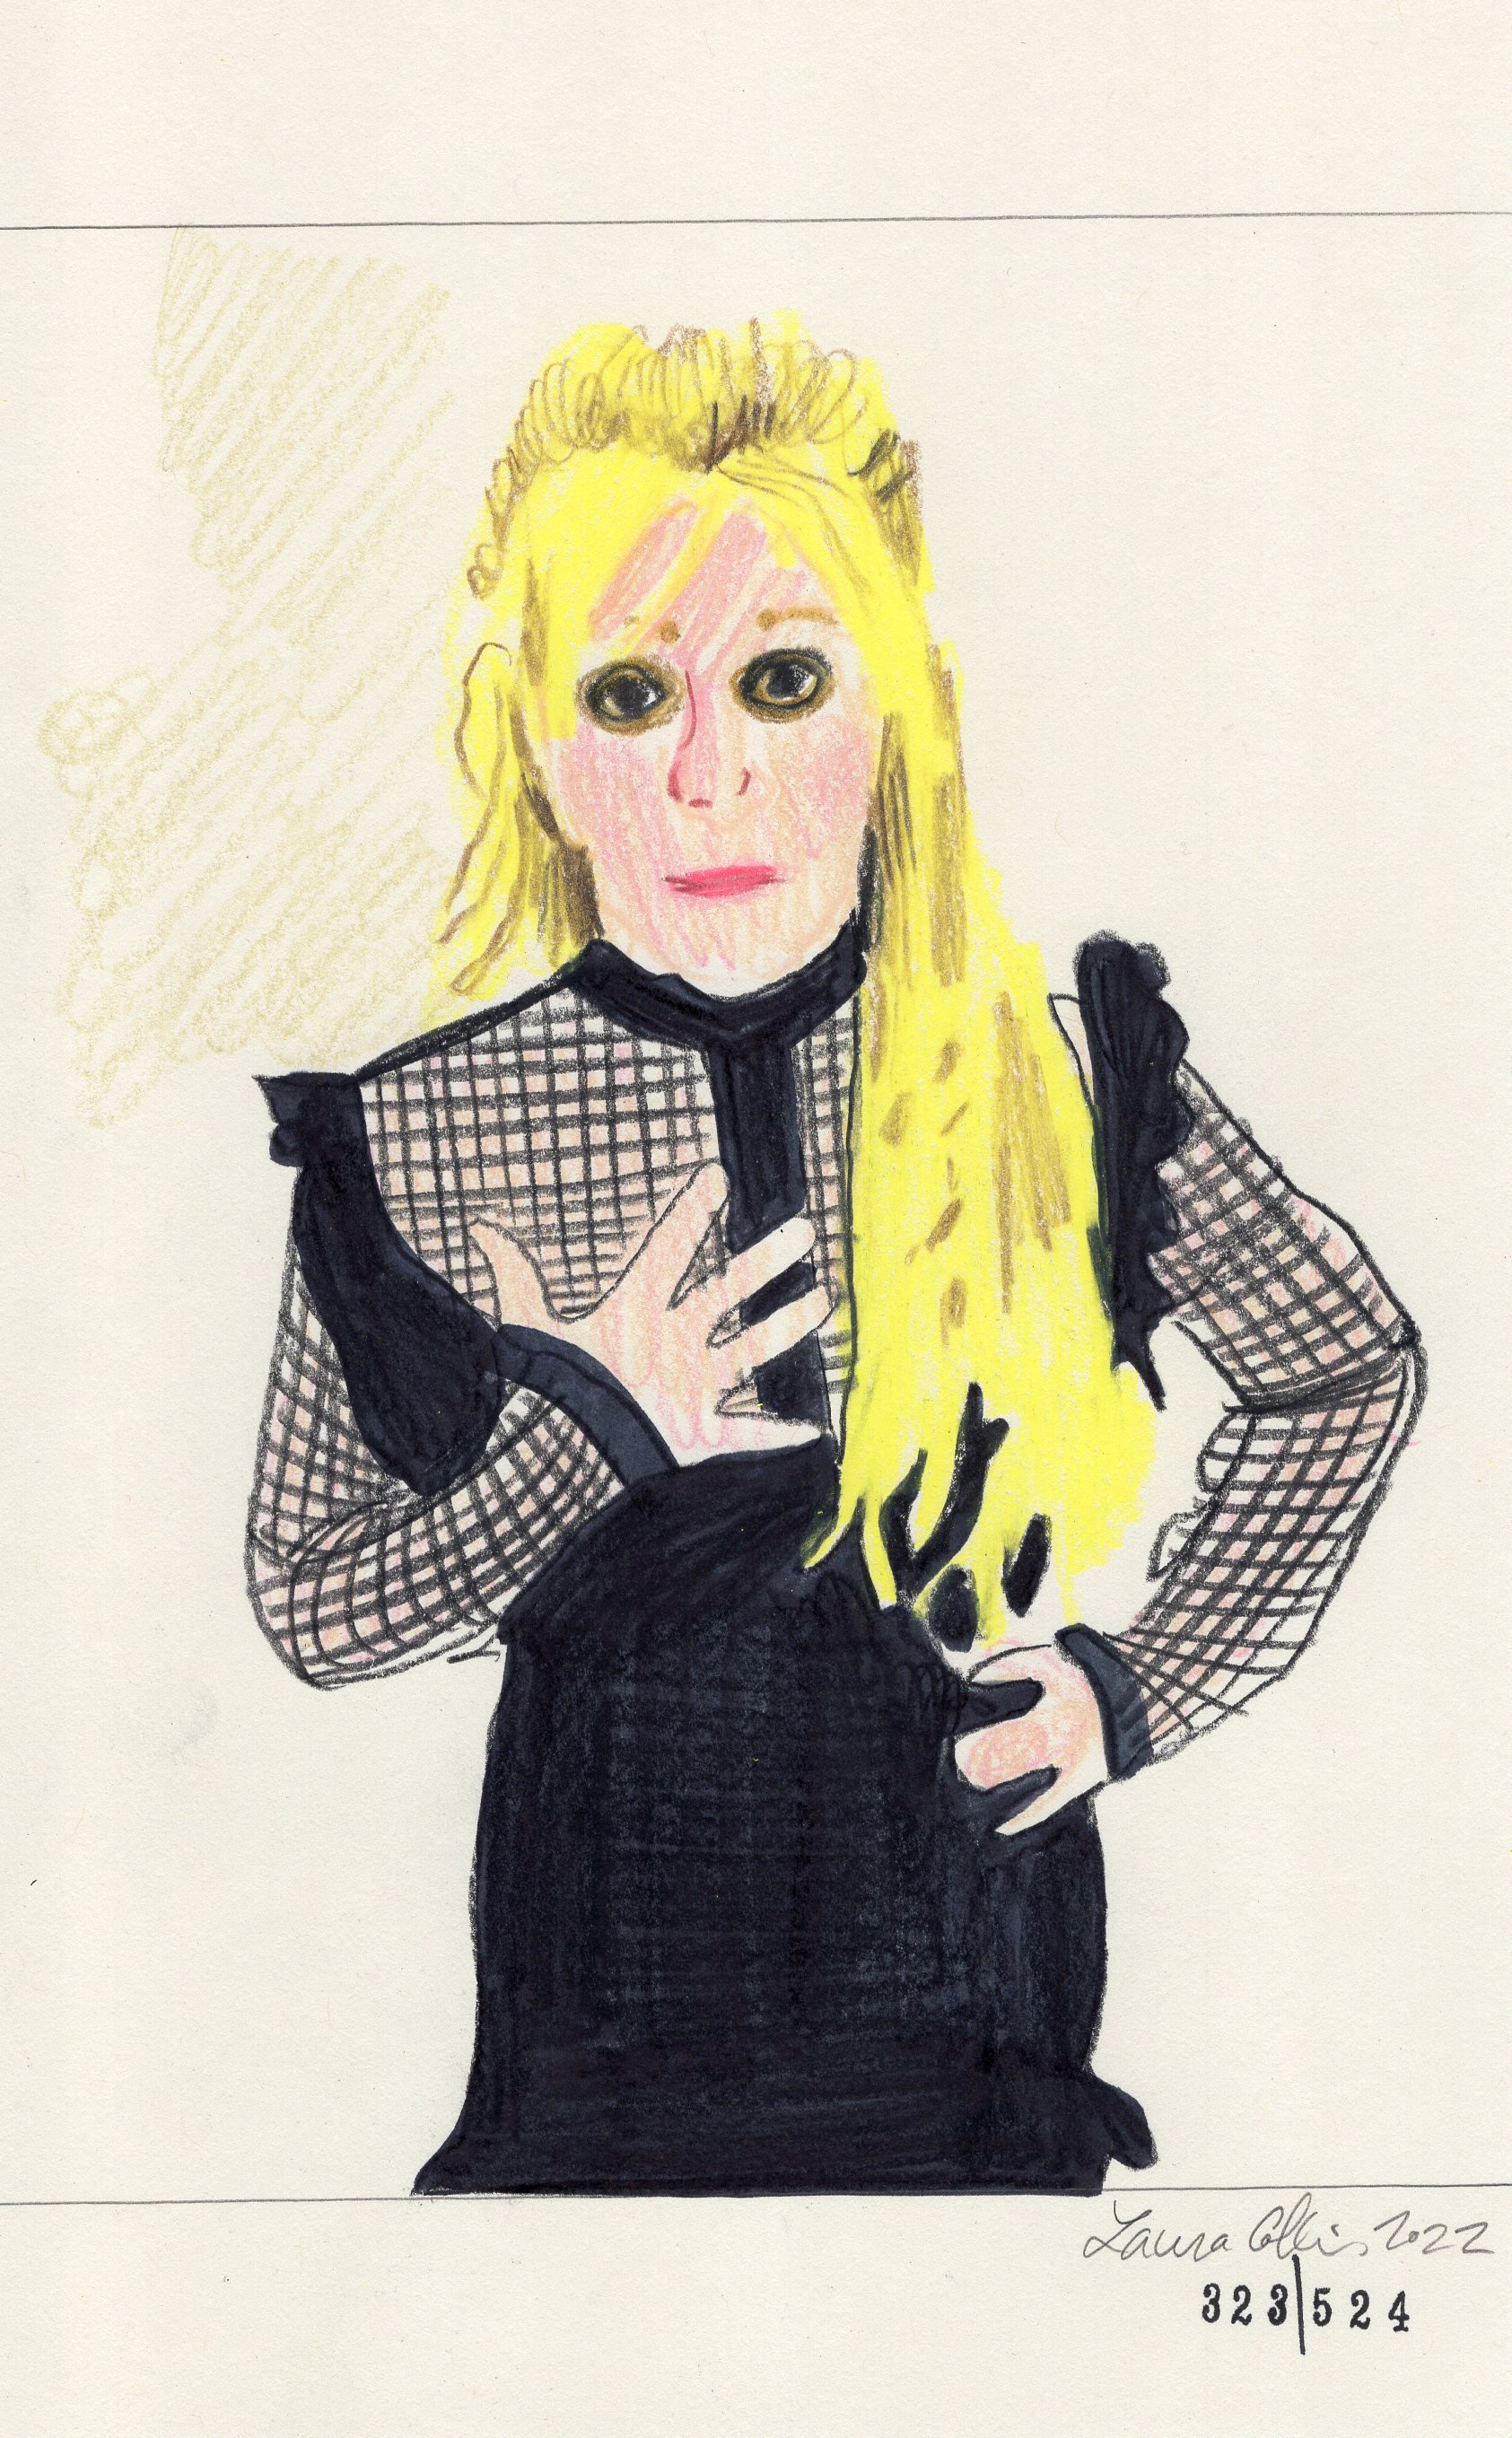 Laura Collins Britney Spears Animation 6x9in mixed media 2022 no323.jpg